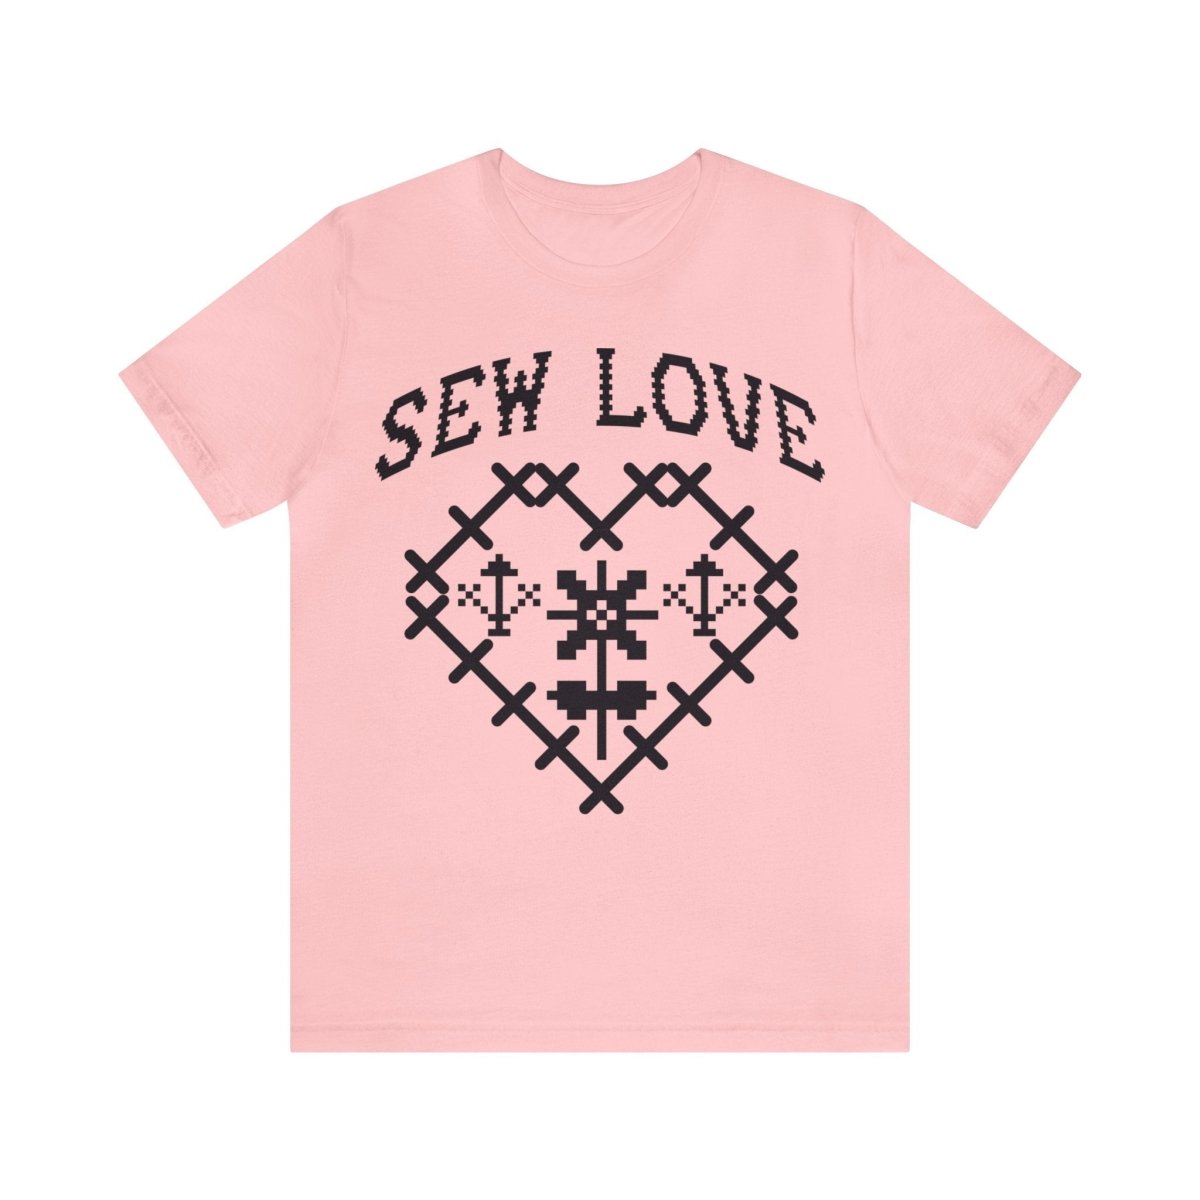 Sew Love Premium T-Shirt, Sewing Grows Love, Stitch, Needlepoint, Embroidery, Craft Gift Skills